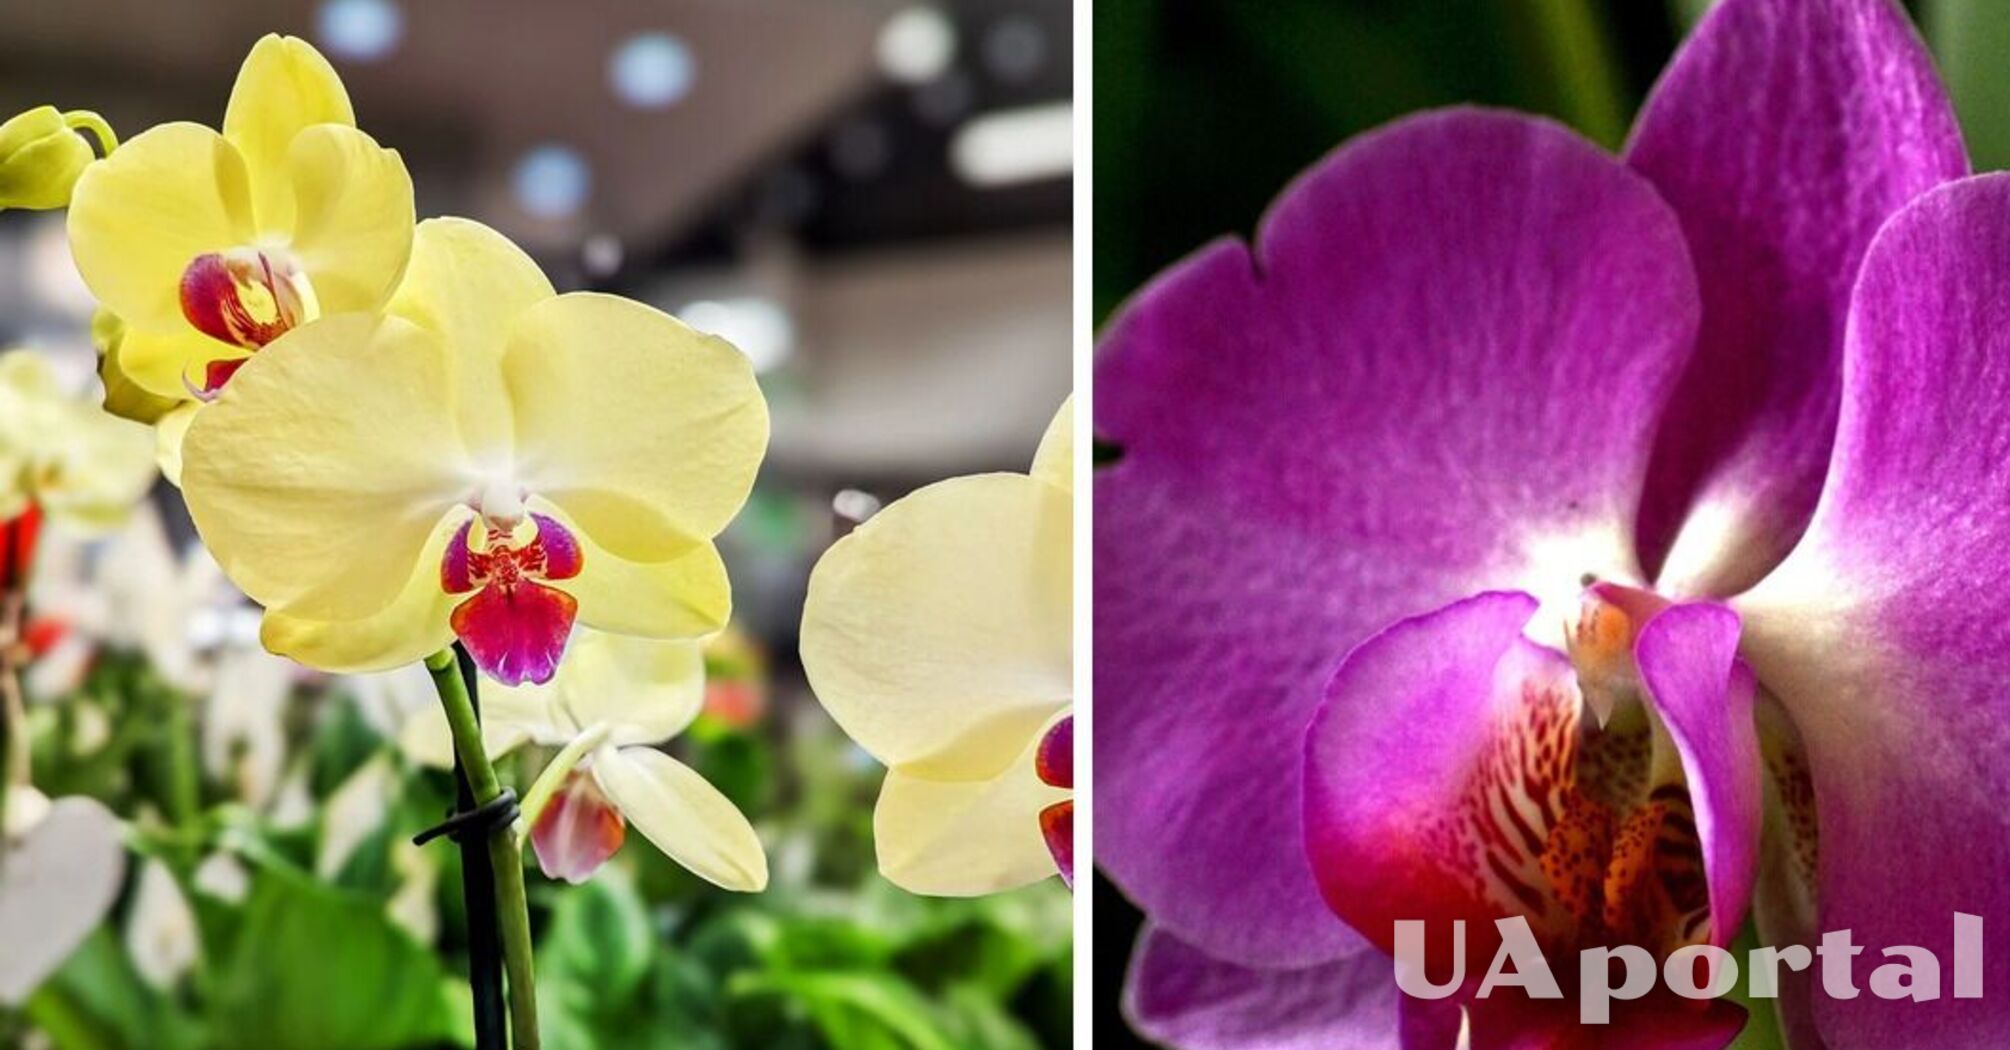 Experts explain when and how to prune orchids properly